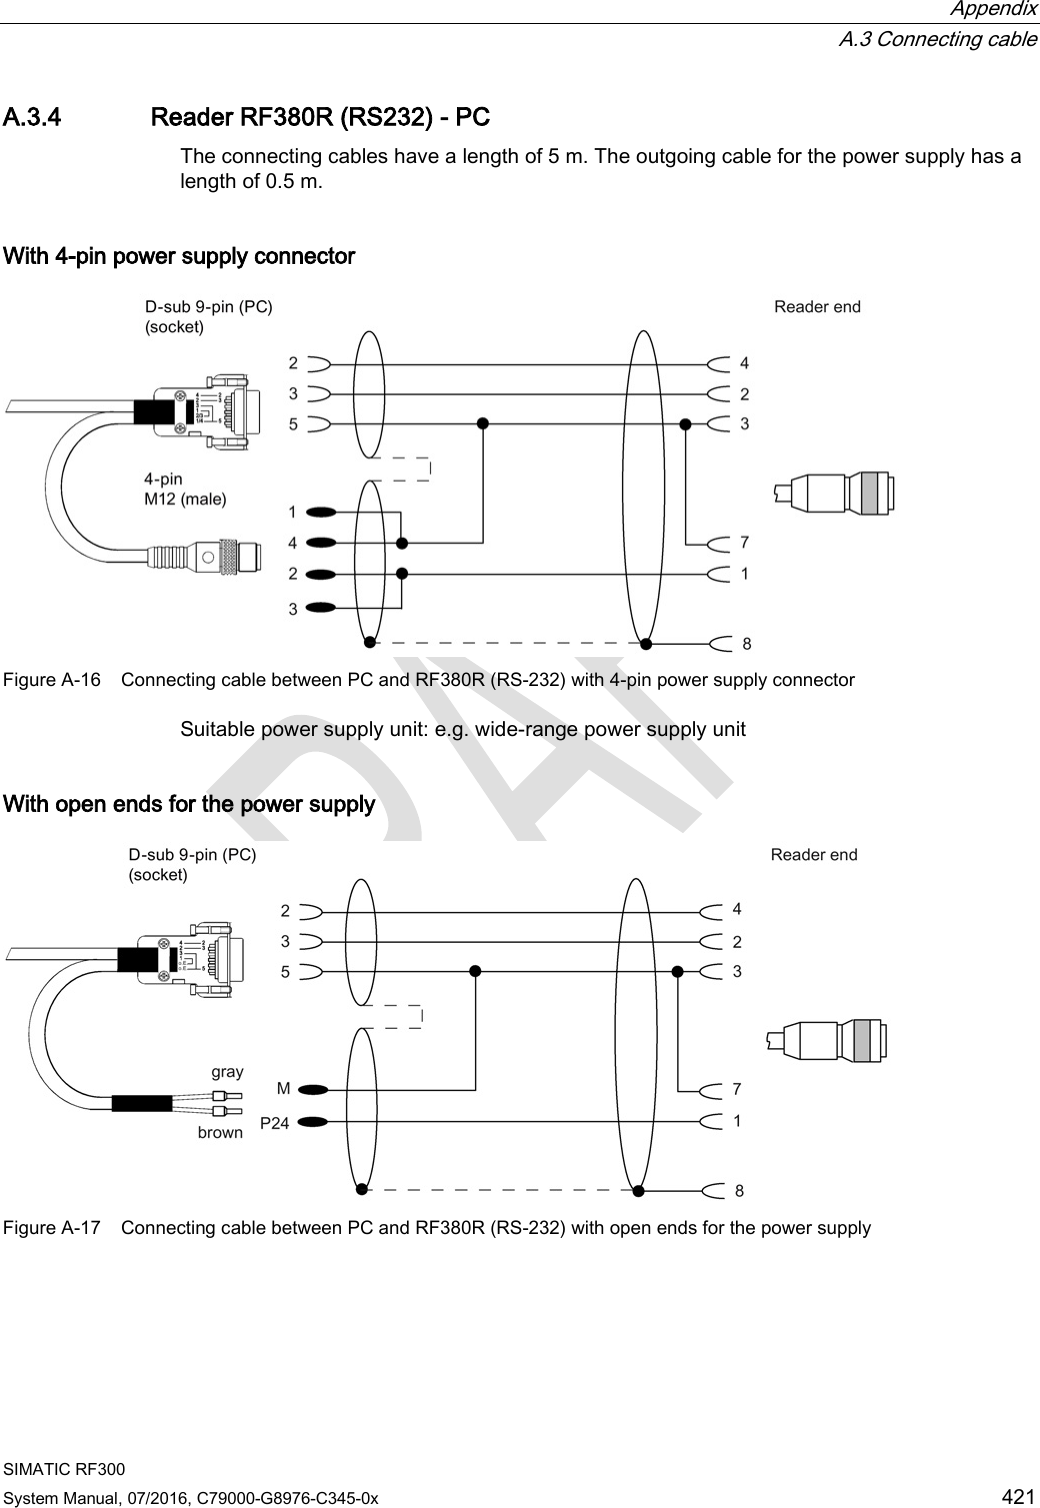  Appendix  A.3 Connecting cable SIMATIC RF300 System Manual, 07/2016, C79000-G8976-C345-0x 421 A.3.4 Reader RF380R (RS232) - PC The connecting cables have a length of 5 m. The outgoing cable for the power supply has a length of 0.5 m. With 4-pin power supply connector  Figure A-16 Connecting cable between PC and RF380R (RS-232) with 4-pin power supply connector Suitable power supply unit: e.g. wide-range power supply unit  With open ends for the power supply  Figure A-17 Connecting cable between PC and RF380R (RS-232) with open ends for the power supply 